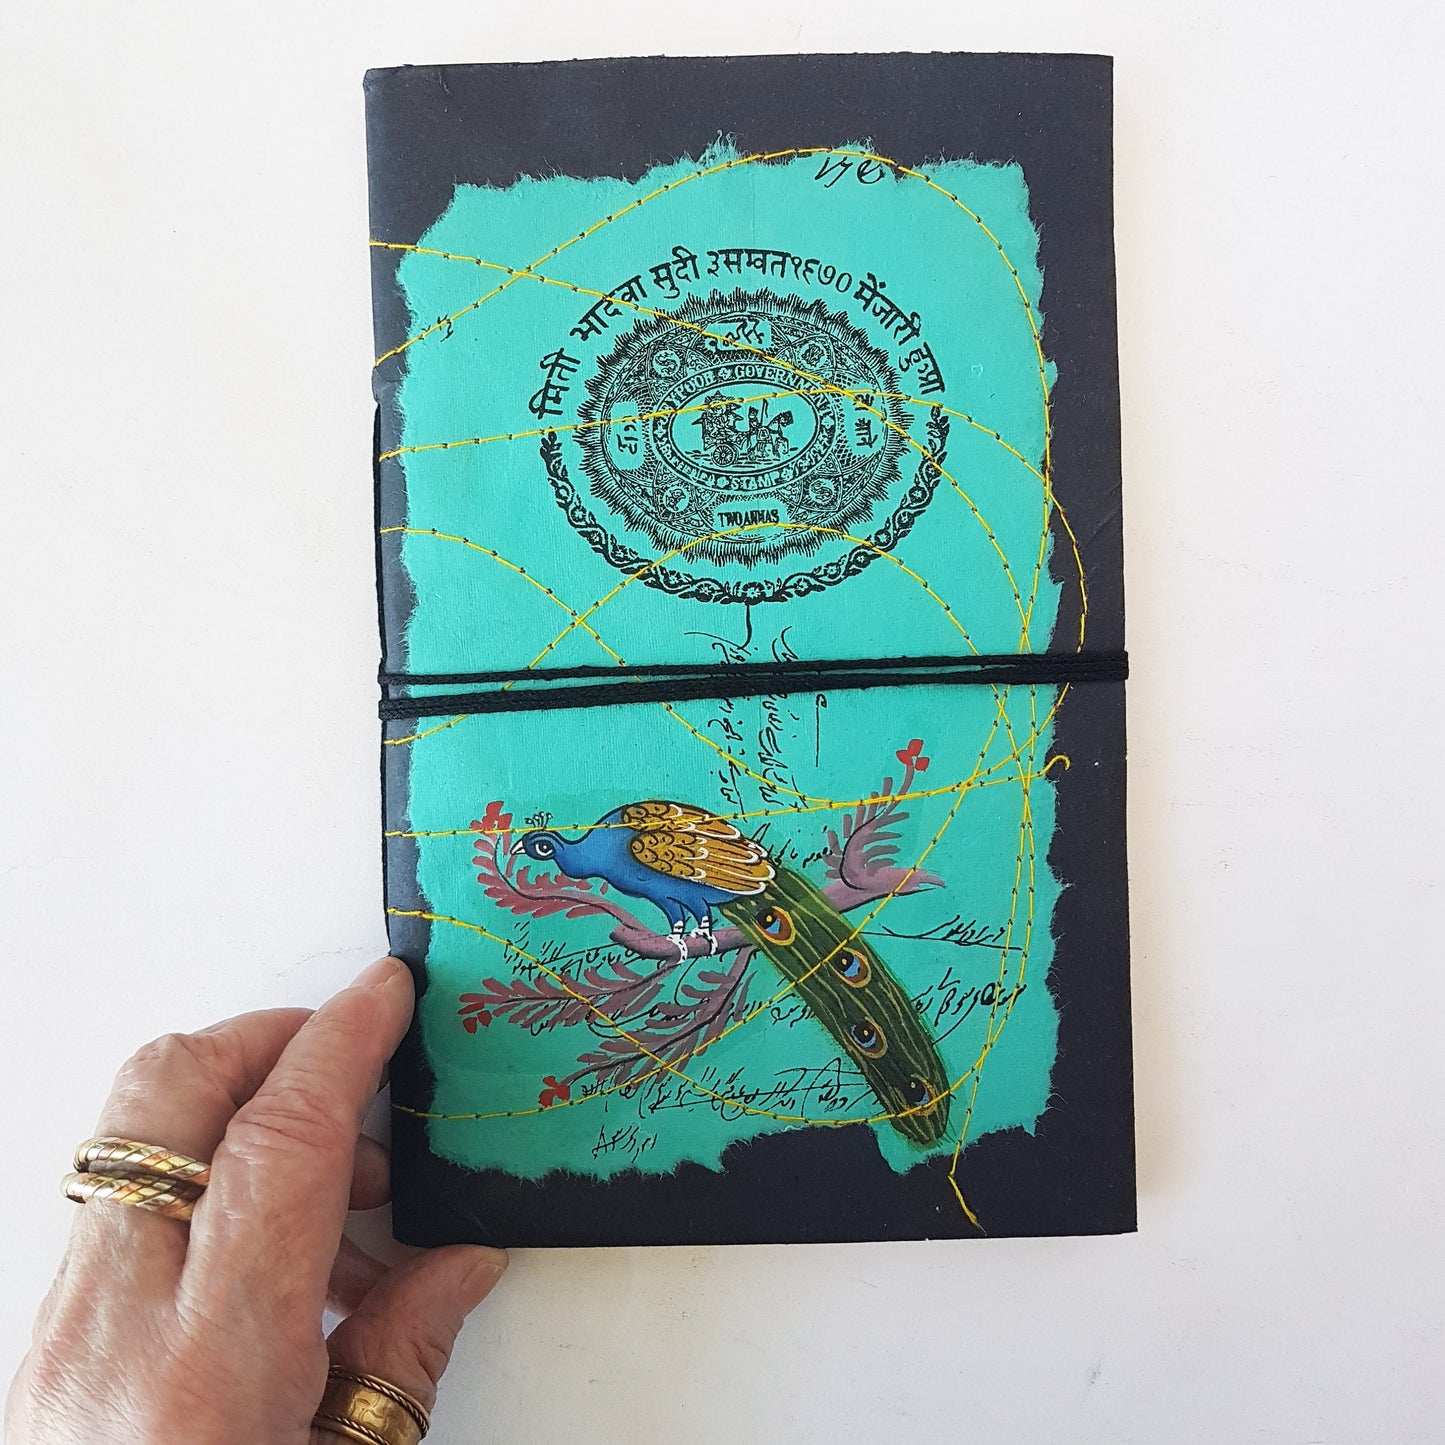 Prancing Peacock Handmade paper journal-diary-notebook-sketchbook 100 pages 5 x 9 inch. Use for student notes, journaling therapy drawing. - Vintage India Ca